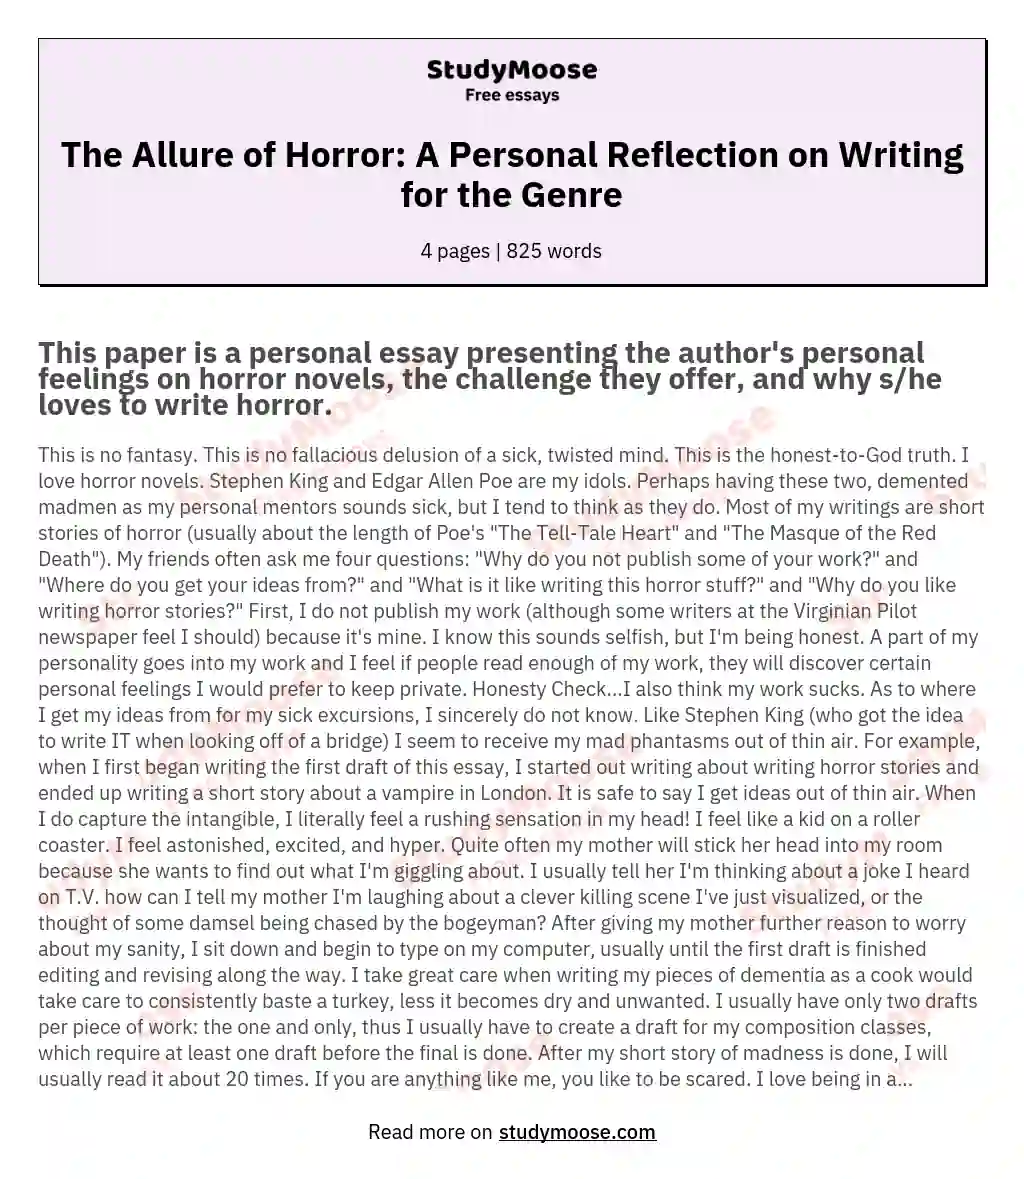 The Allure of Horror: A Personal Reflection on Writing for the Genre essay